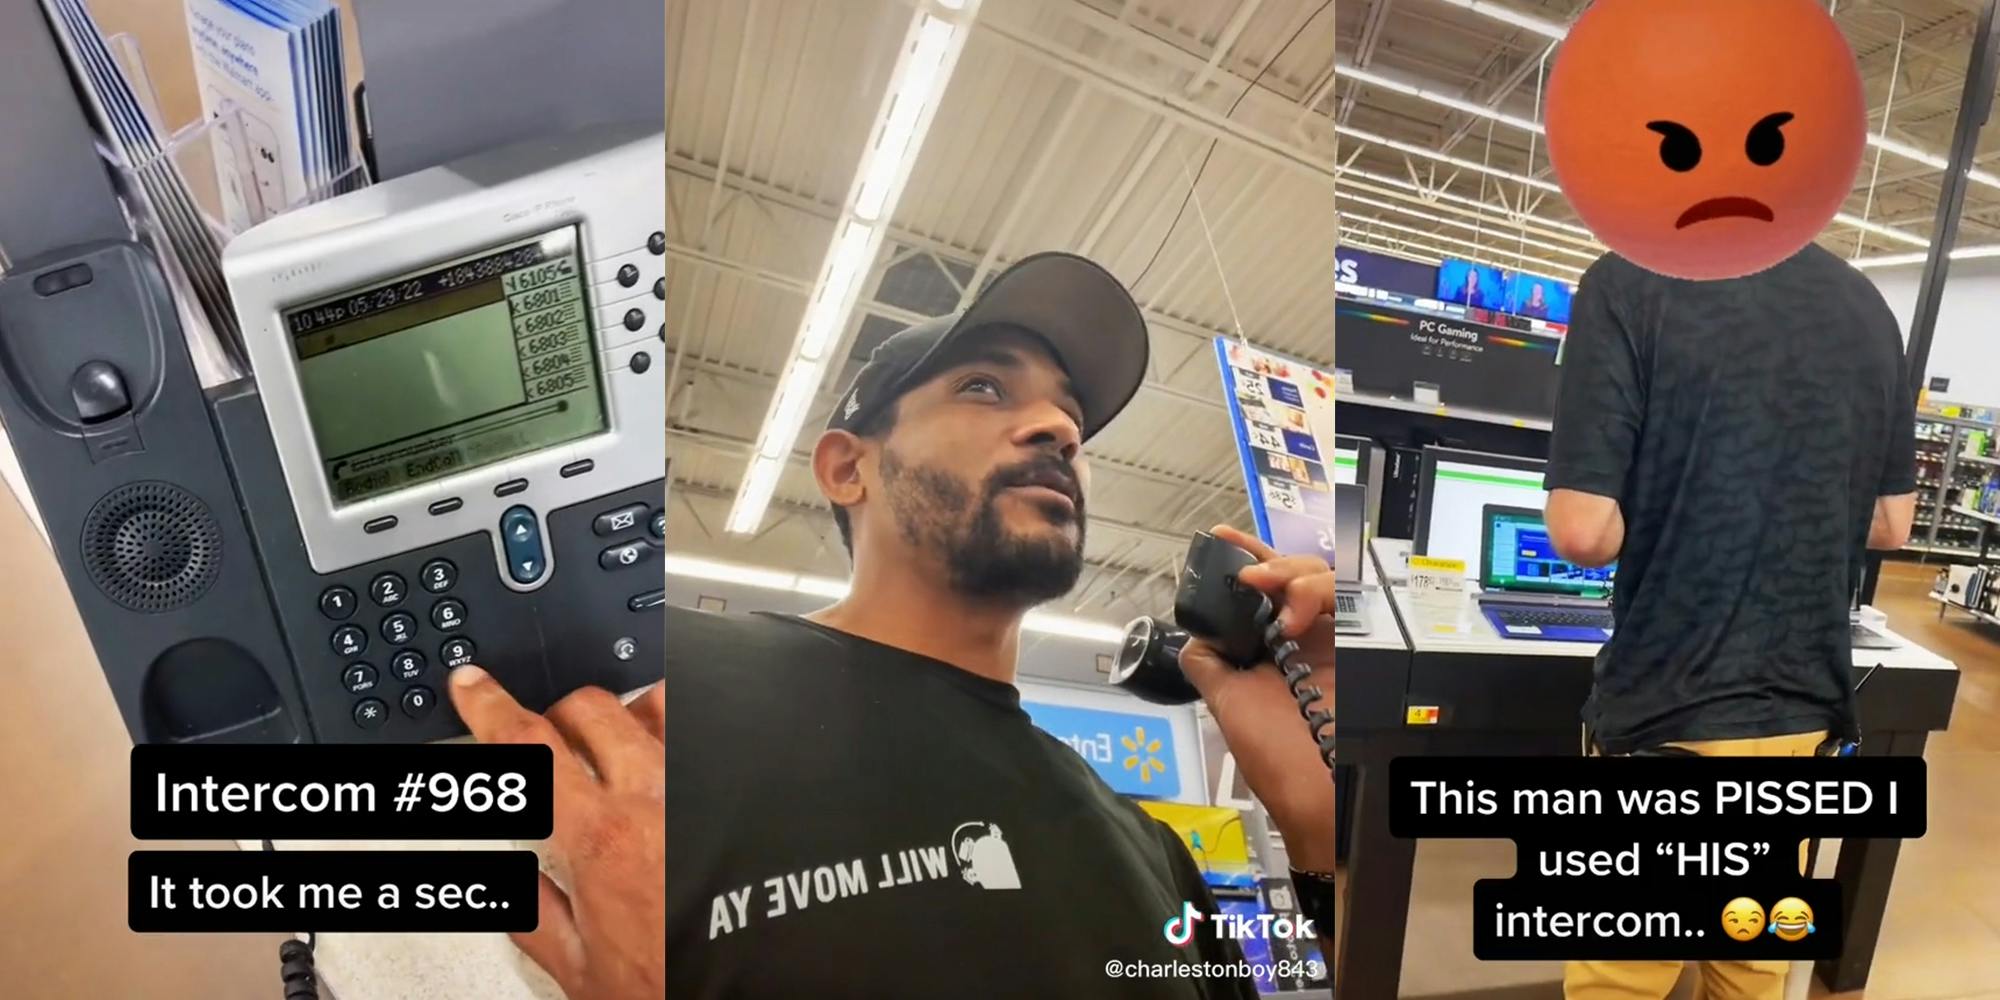 man dialing phone with caption "intercom #968 it took me a sec.." (l) man on phone in walmart (c) walmart employee with angry emoji over head and caption "This man was PISSED I used "HIS" intercom.." (r)